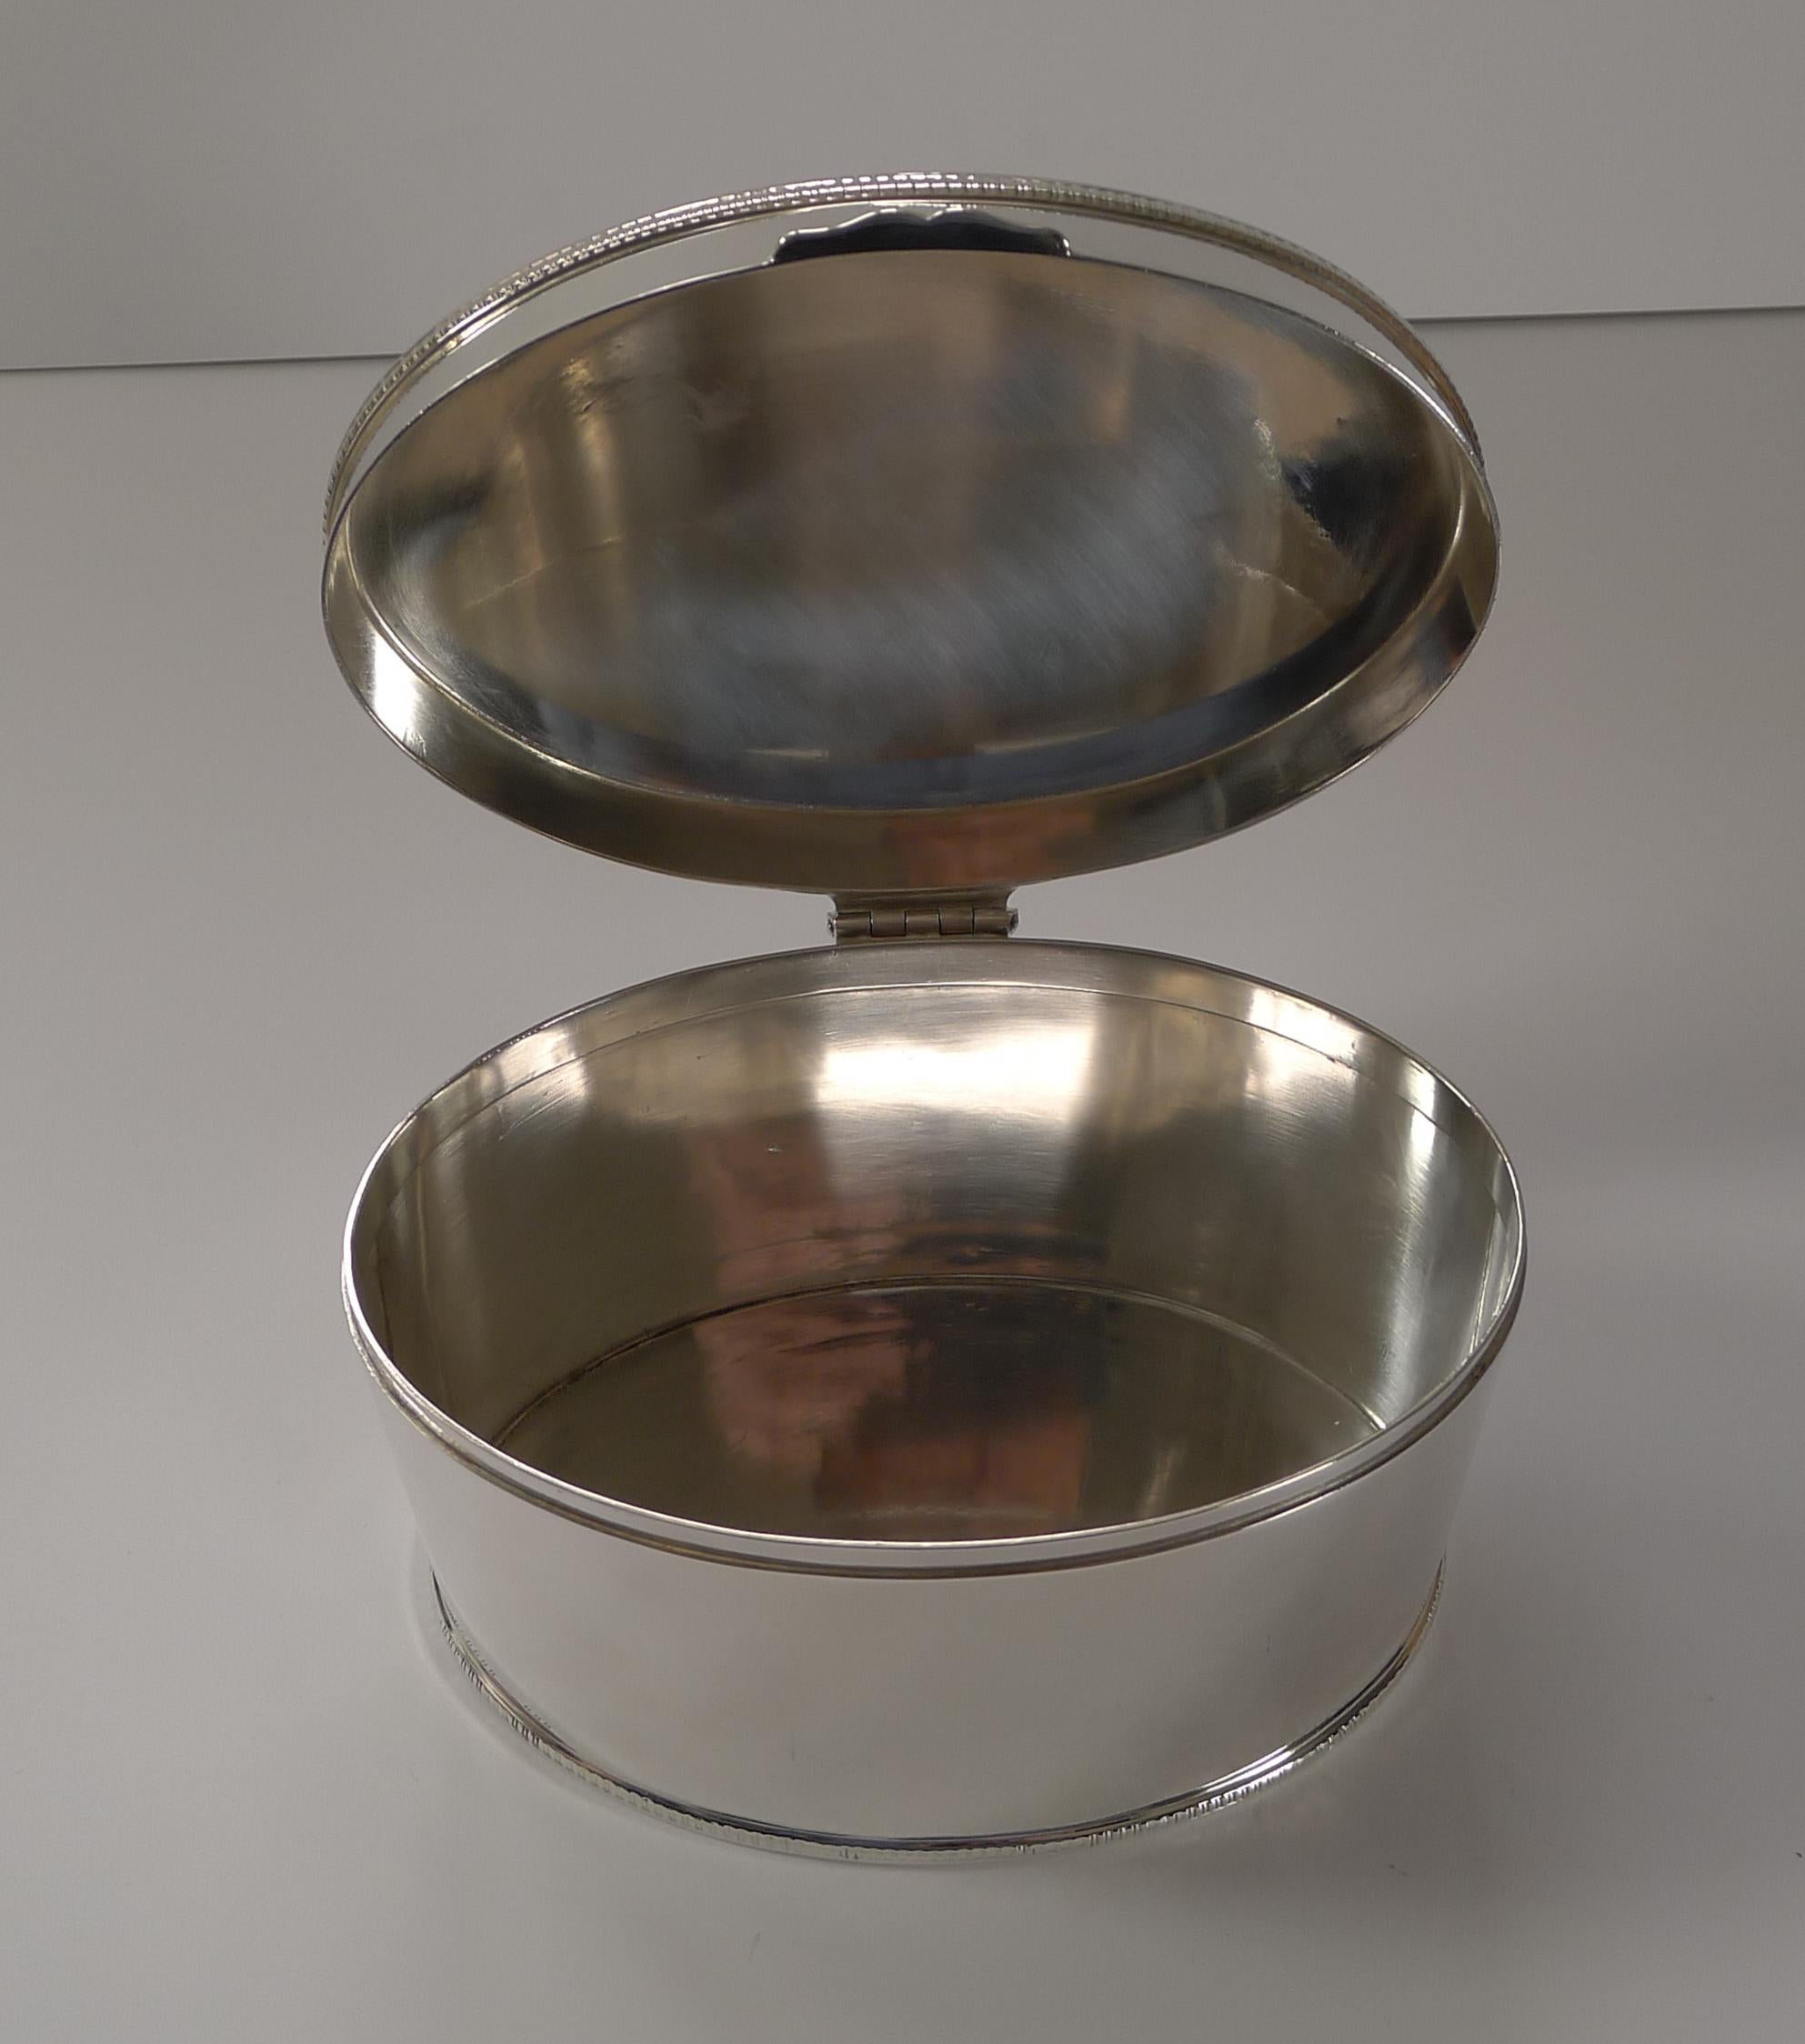 A fabulous antique English silver plated biscuit box of ovoid form with a hinged lid; simple and as fashionable today as it would have been over 100 years ago.

Just back from our silversmith's workshop where it has been professionally cleaned and